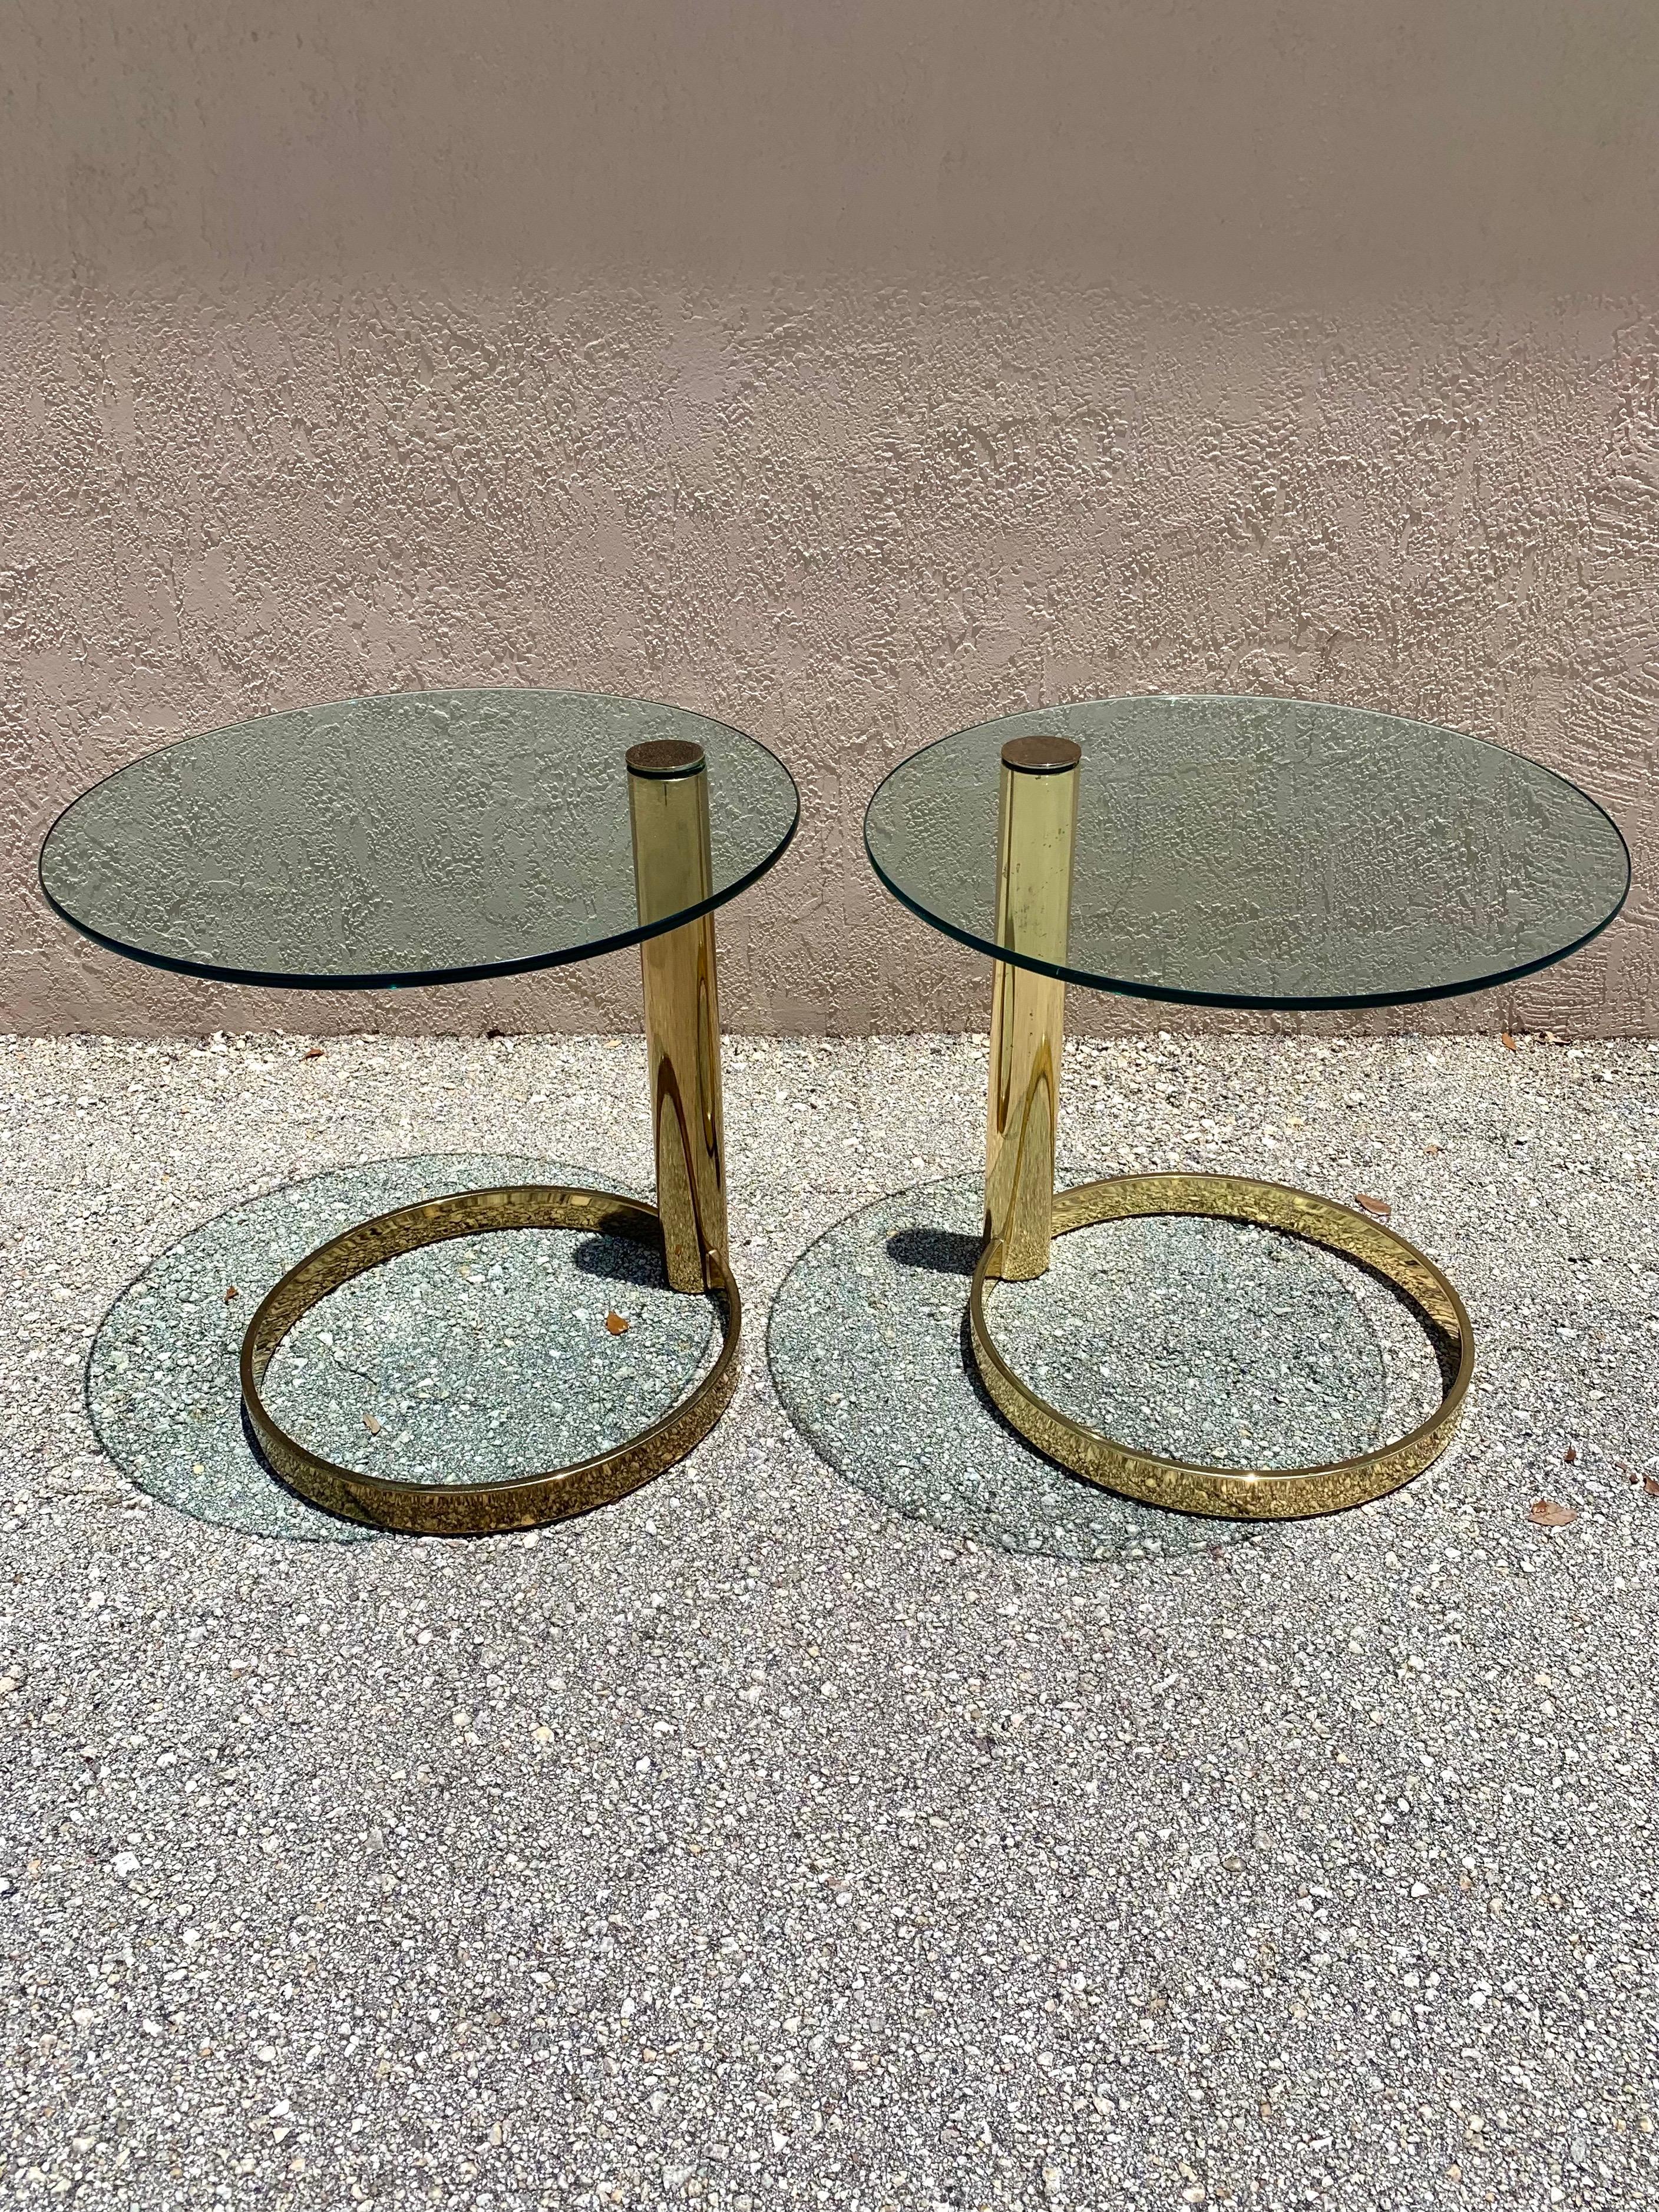 Pair of end tables designed by Leon Rosen for Pace. Brass cantilevered base with a thick glass table top. Exemplary design bridging the gap between Mid-Century Modern and Postmodern. 

Tempered glass attached to a singular brass cylinder which